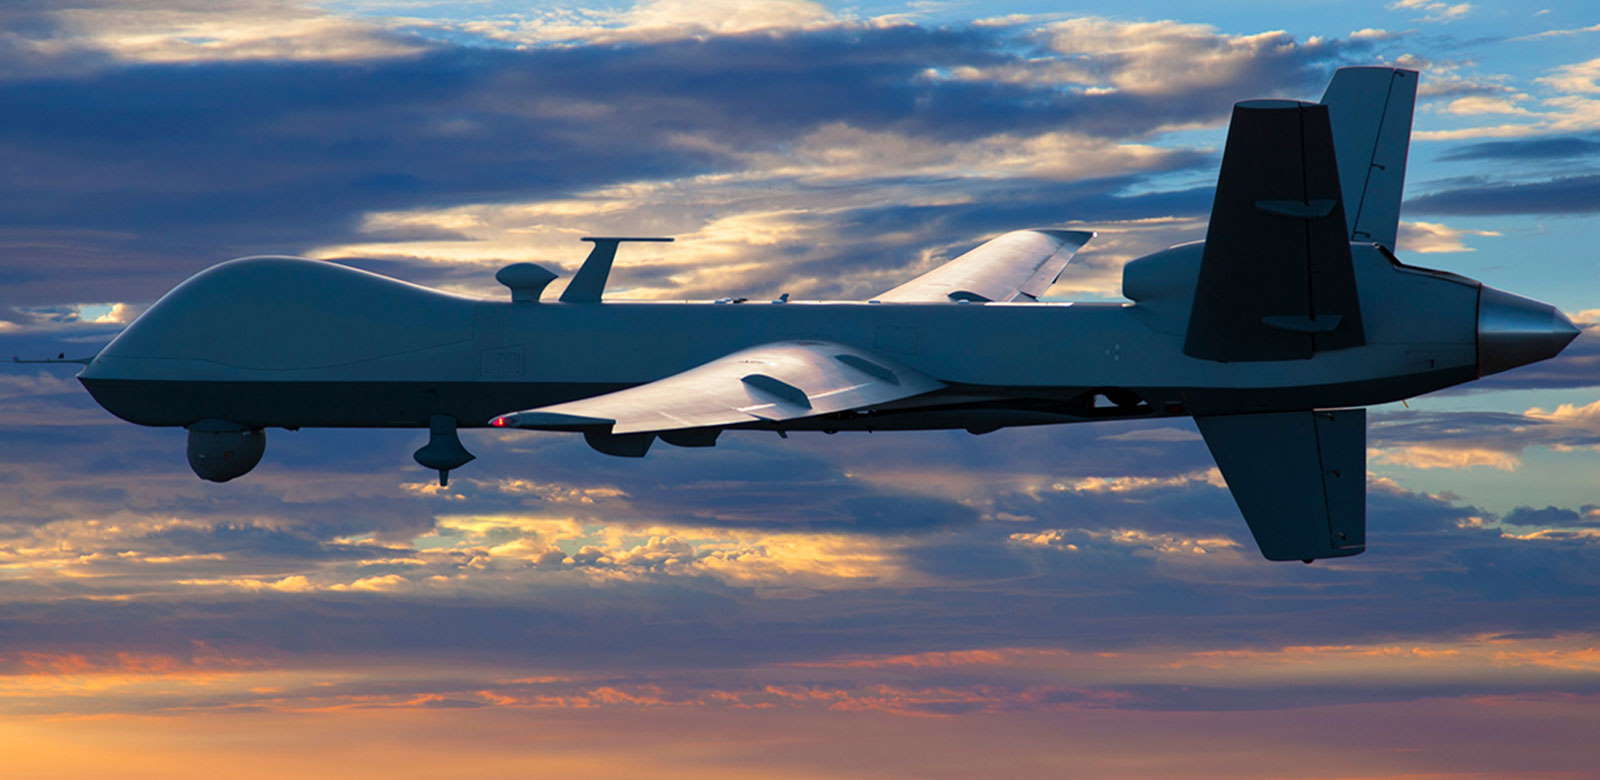 RNLAF To Begin MQ 9 Operations In Curacao News Business Of Drones